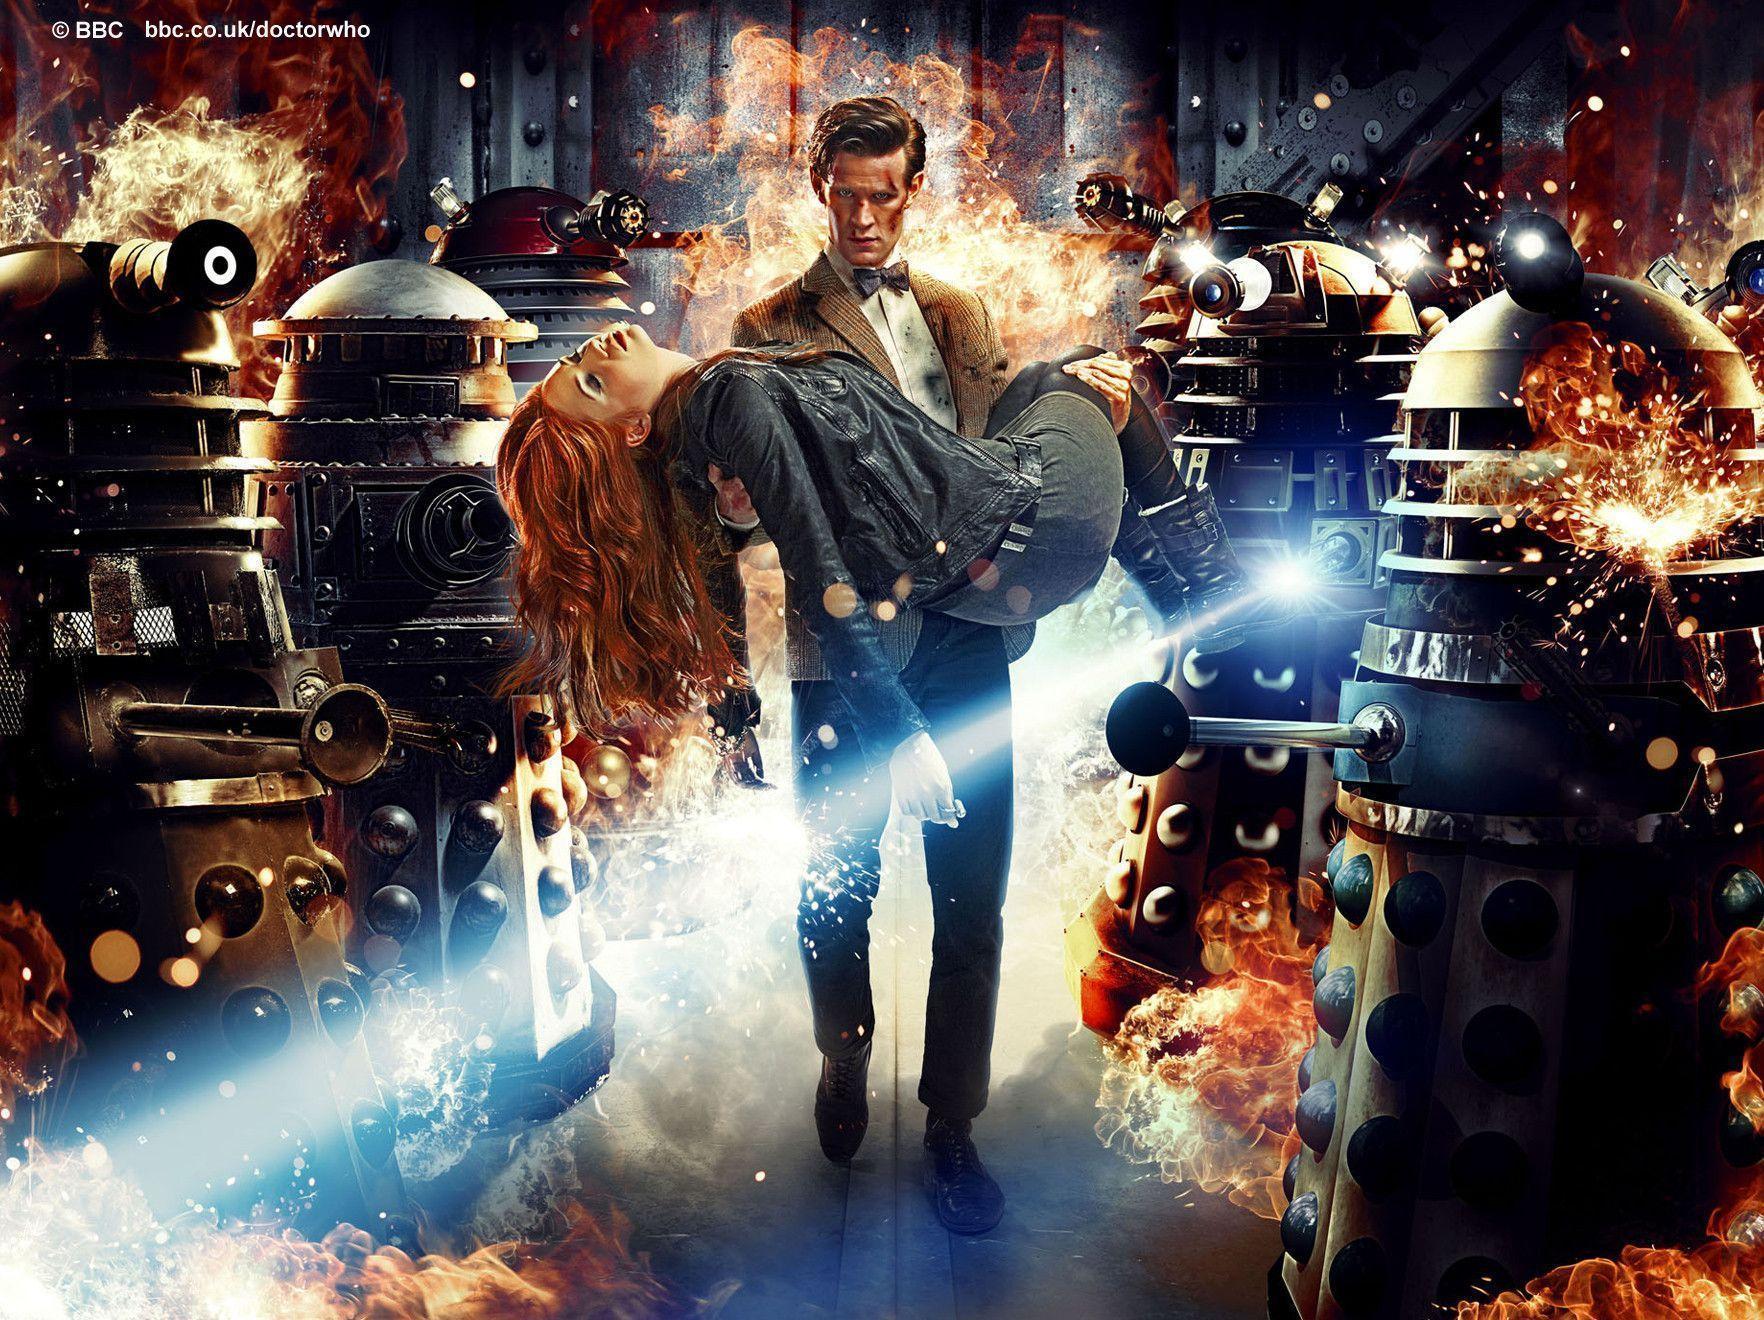 image For > Eleventh Doctor Wallpaper